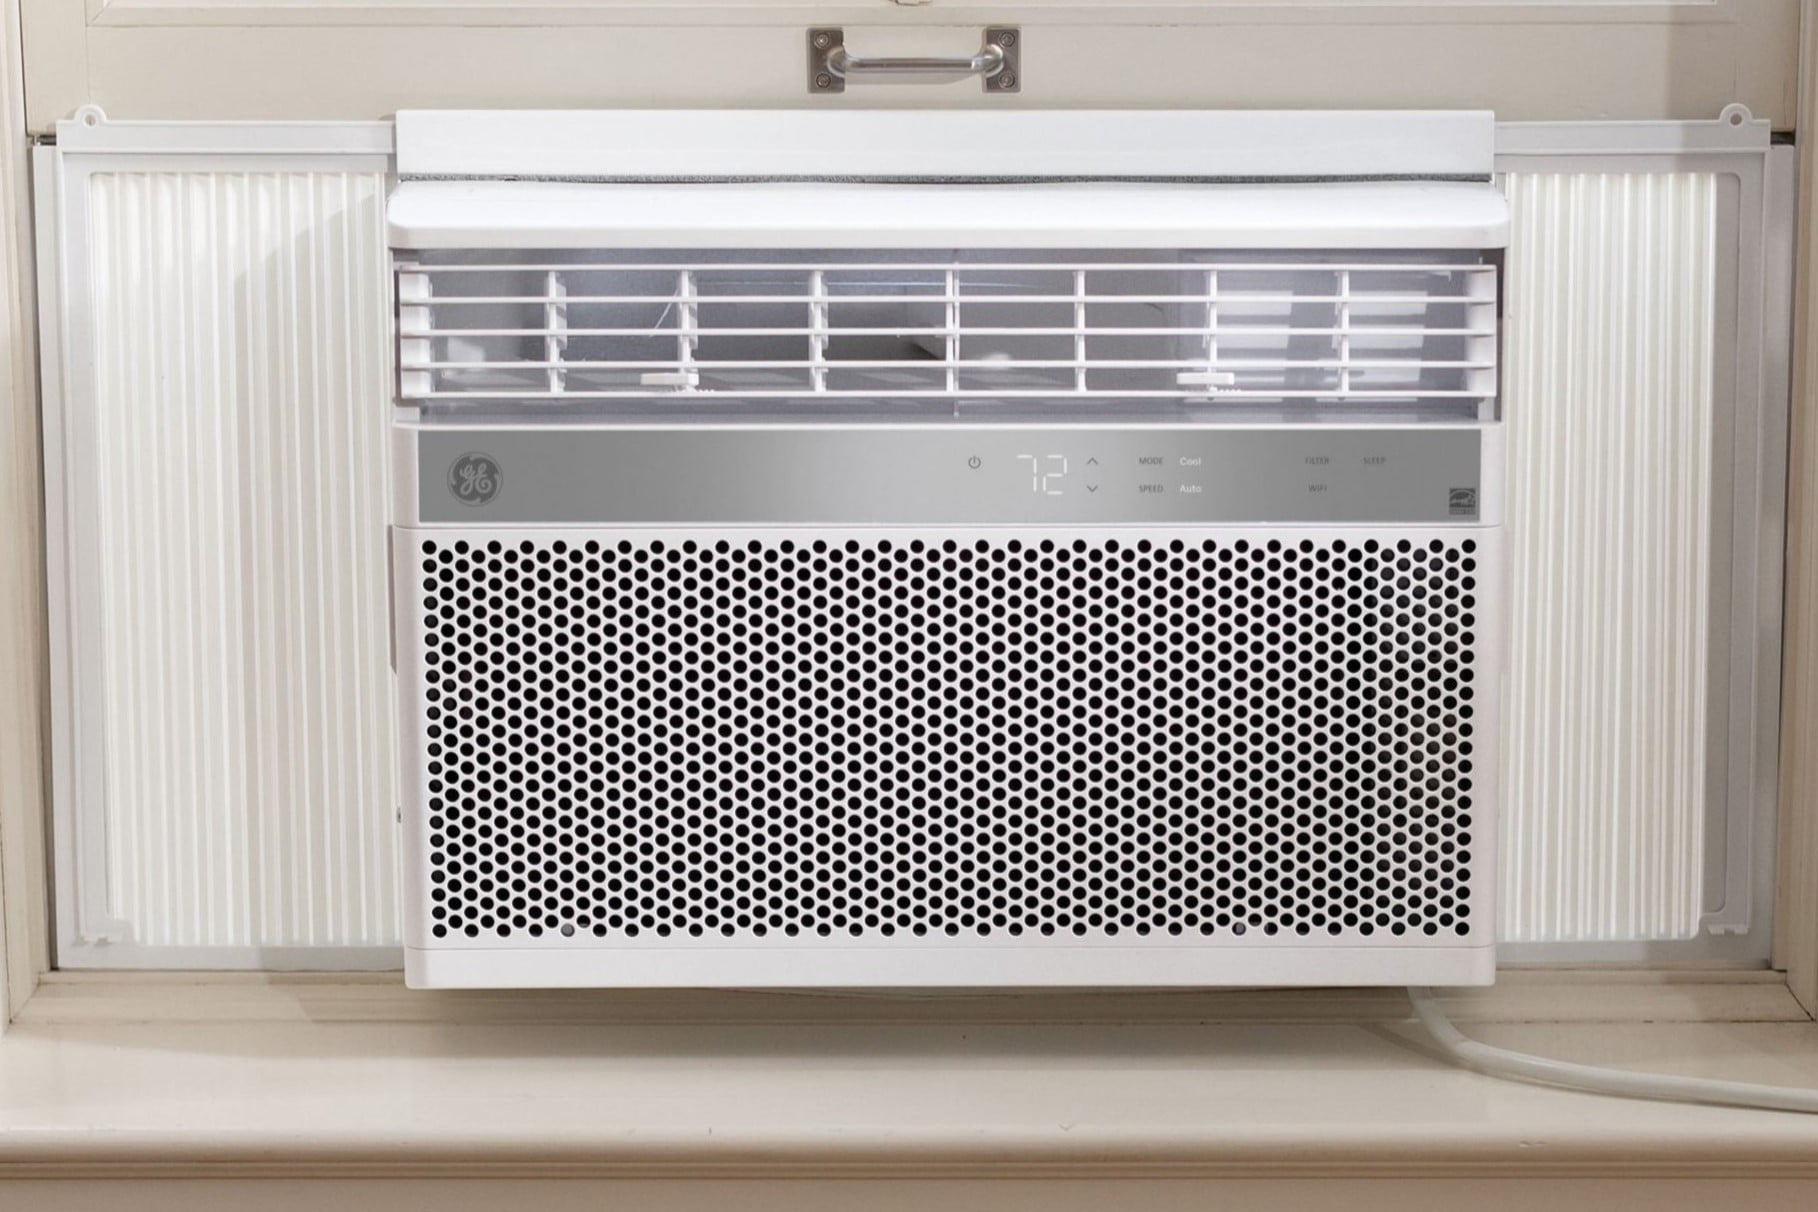 How Much Is An 8,000 Btu Air Conditioner